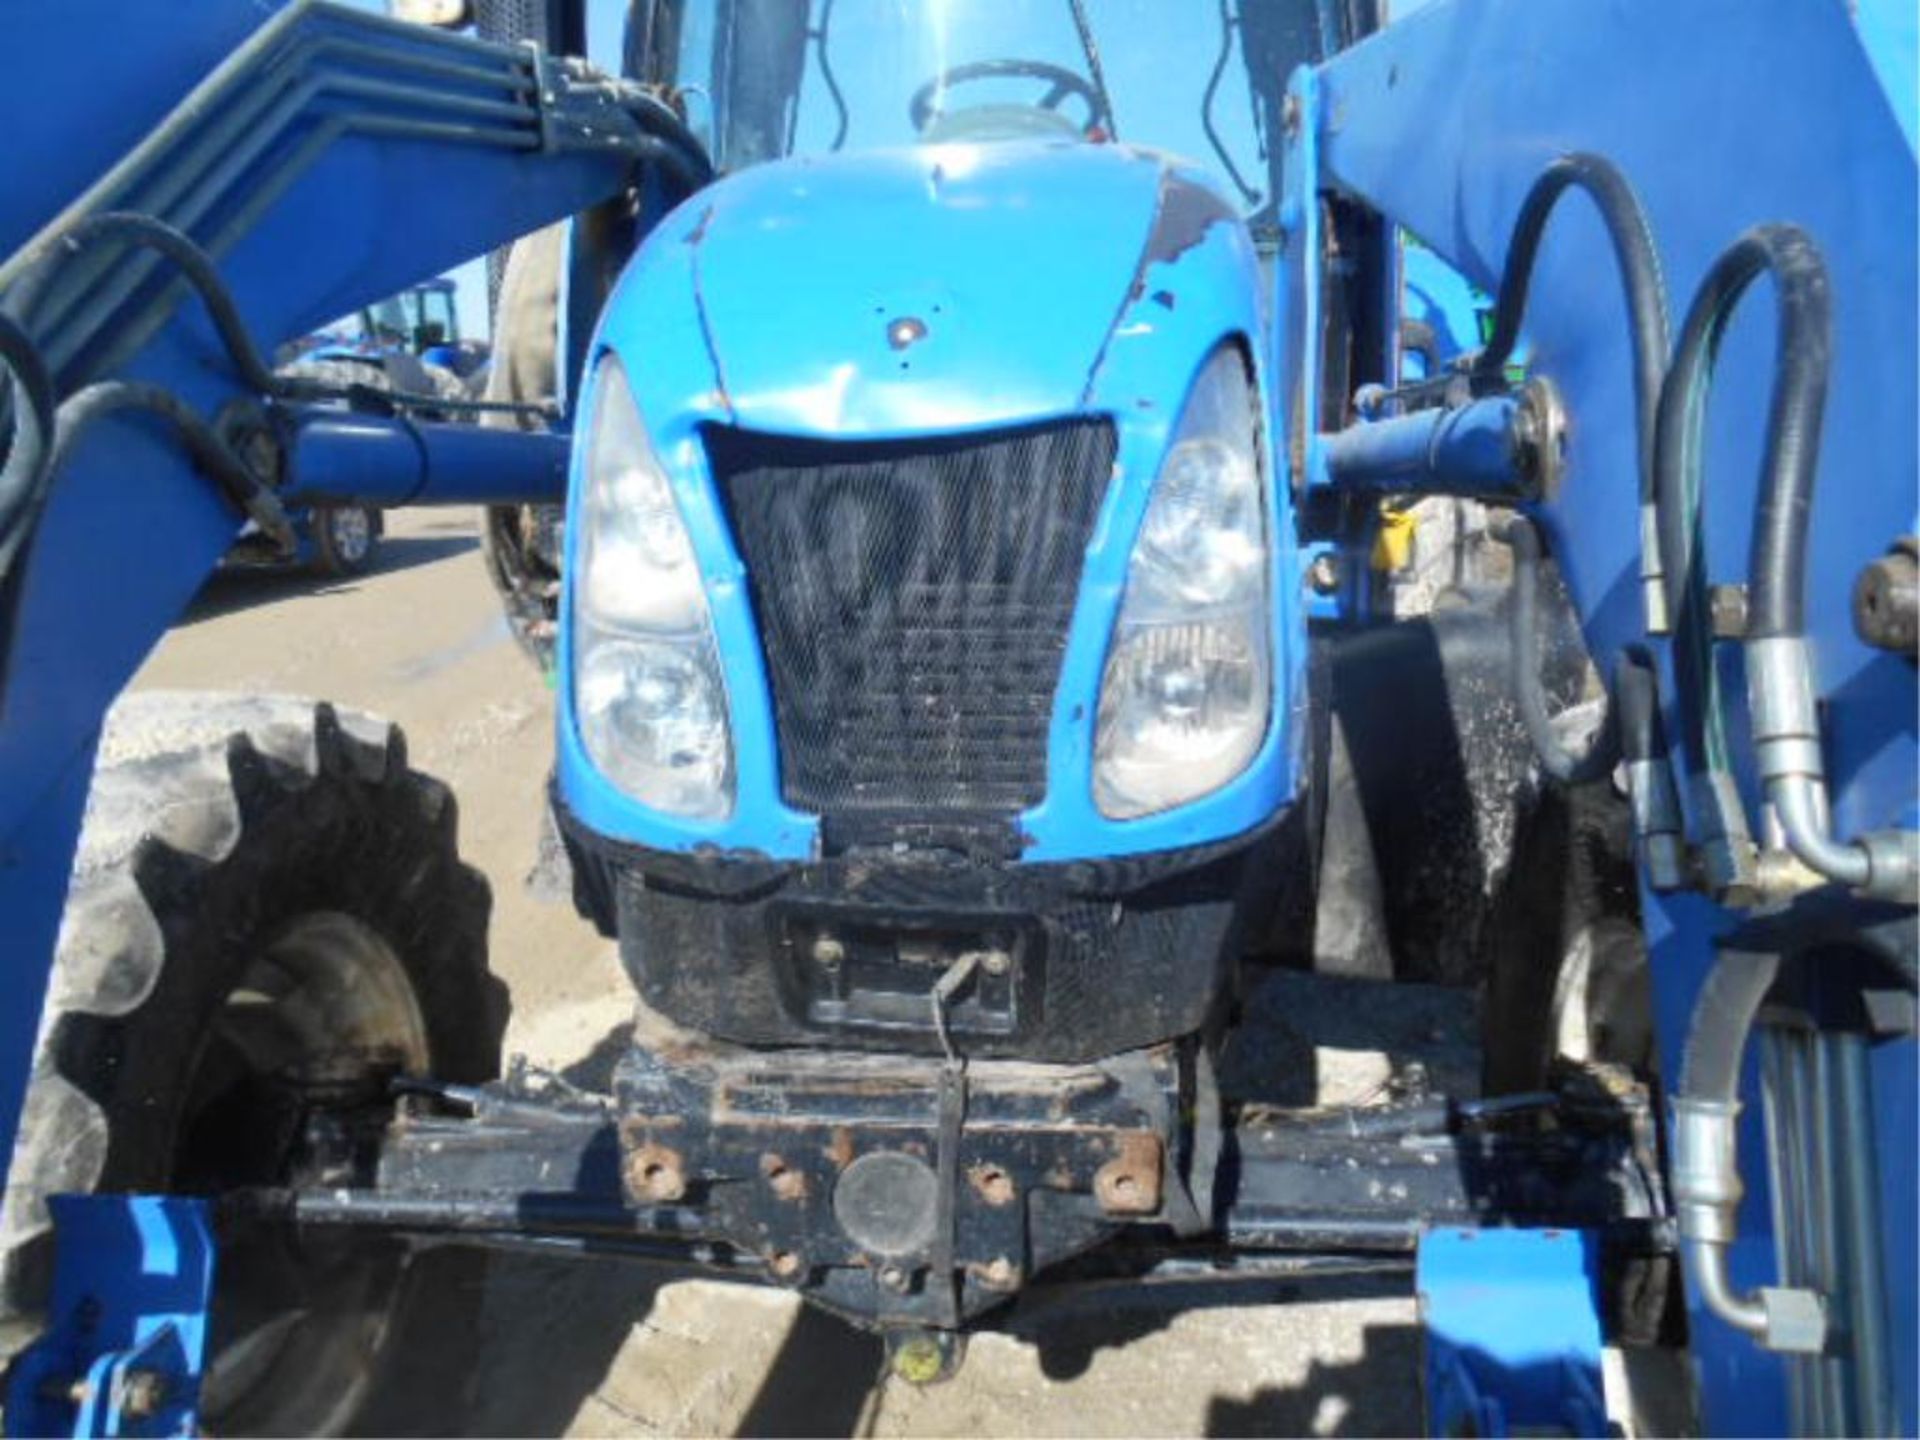 New Holland TS115 Tractor. '06, sn#ACP258890 9523 Hrs, MFWD, Cab, 115 HP, 12/2, 3 Pt, 2 Hyd. - Image 20 of 20